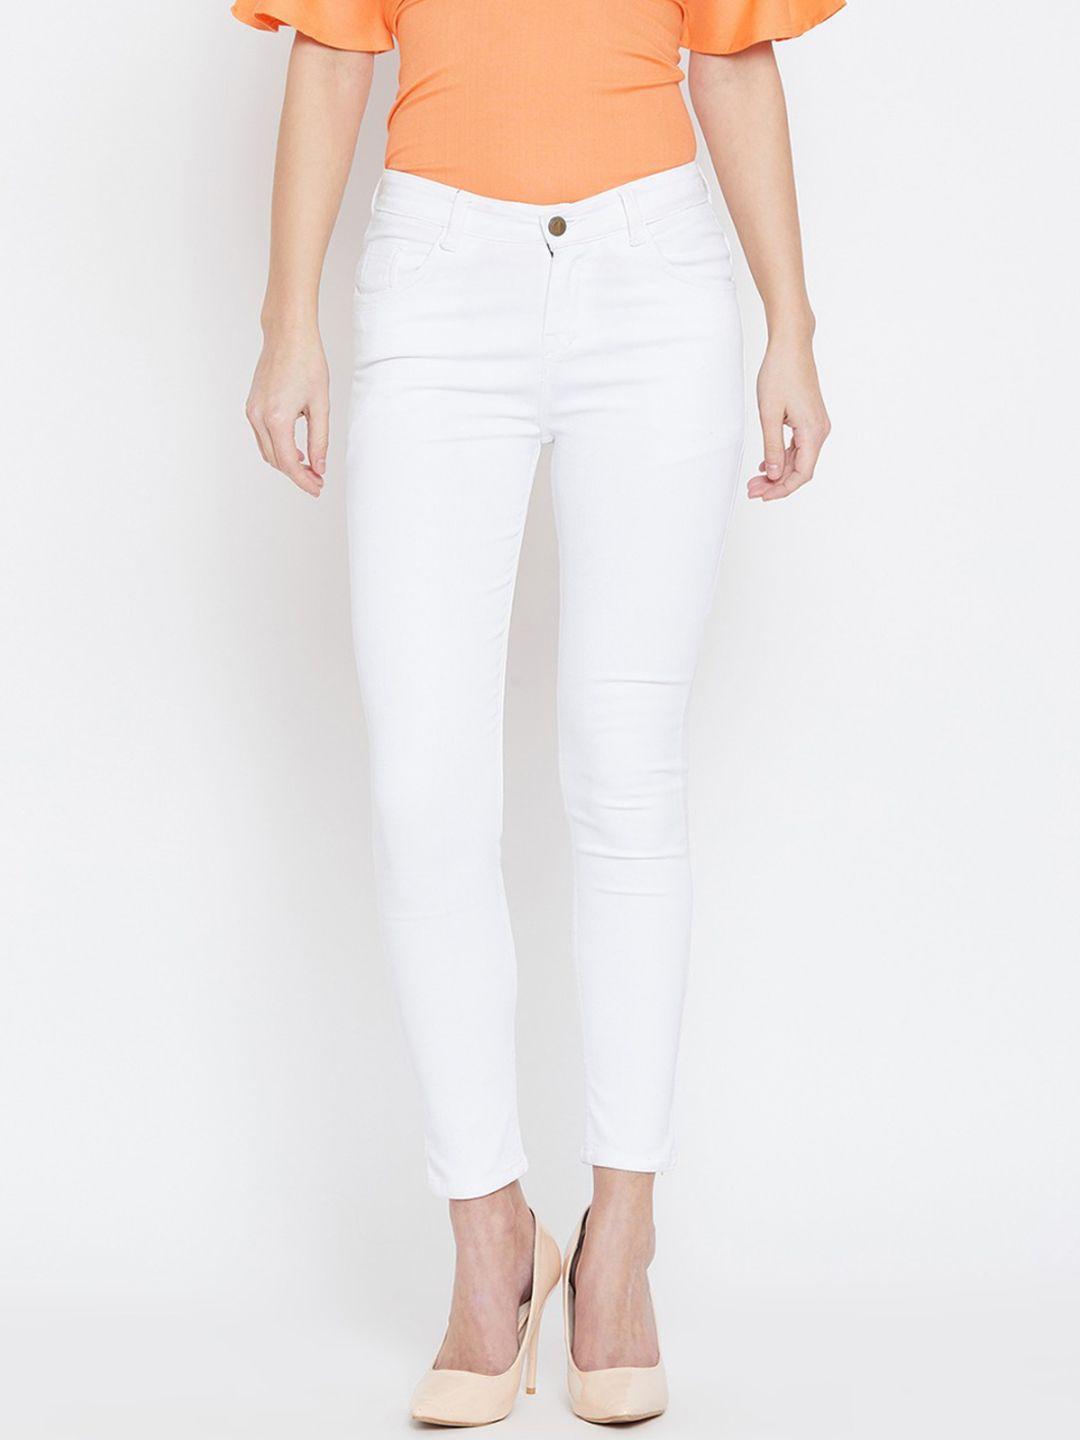 the dry state women white slim fit mid-rise clean look stretchable jeans